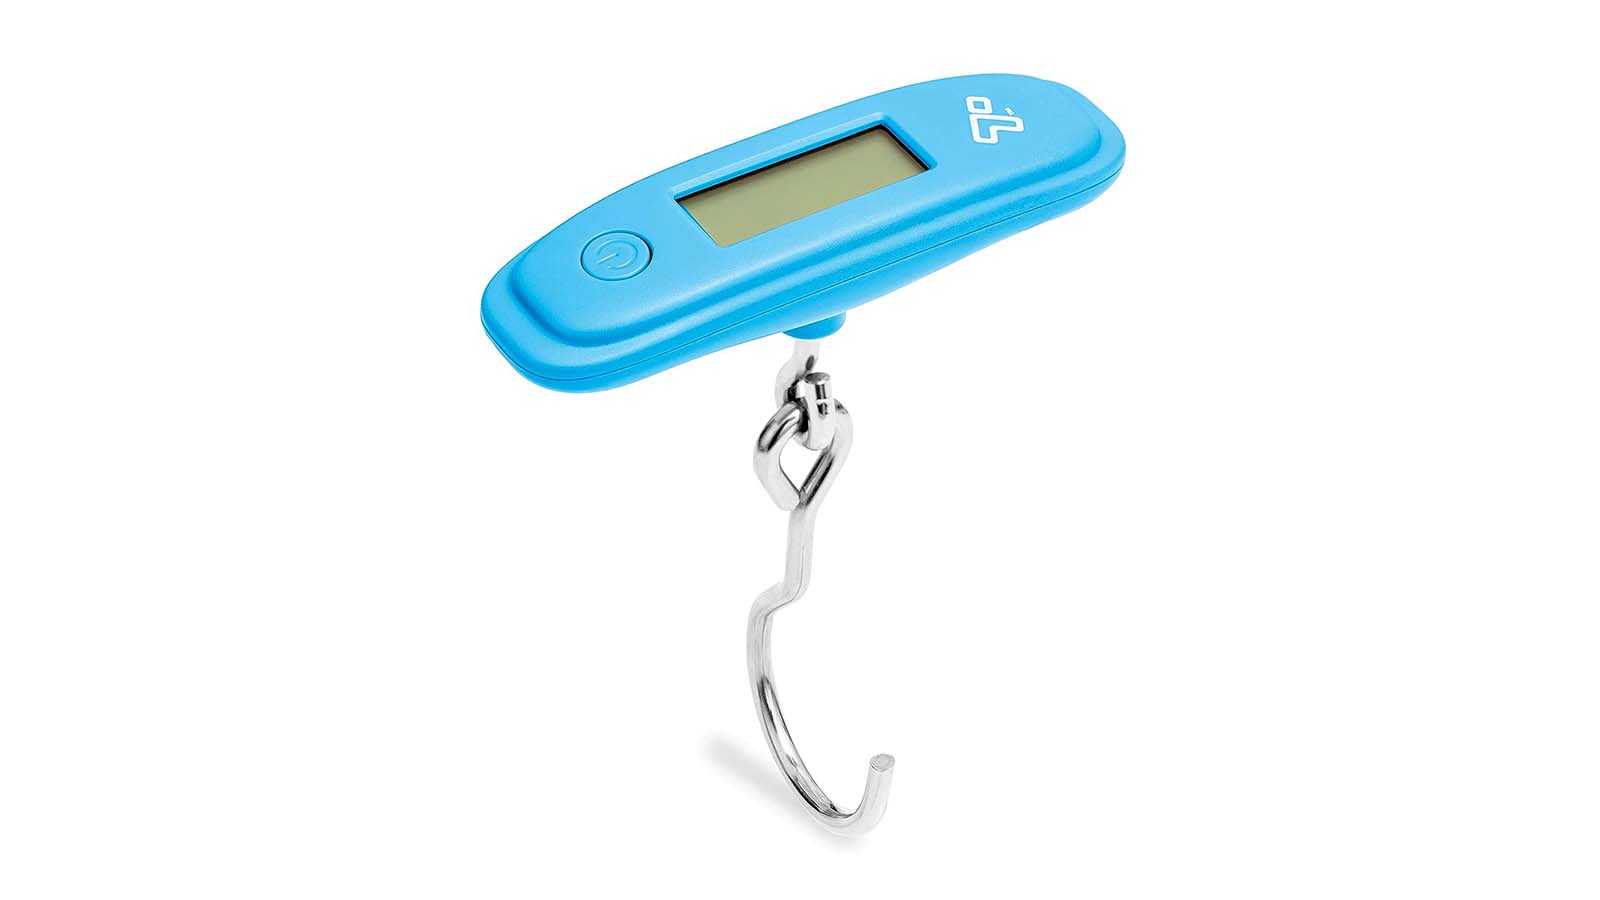 FREETOO Portable Luggage Scale Digital Travel Scale Suitcase Scales Weights  with Tare Function 110 lb/ 50KG Capacity